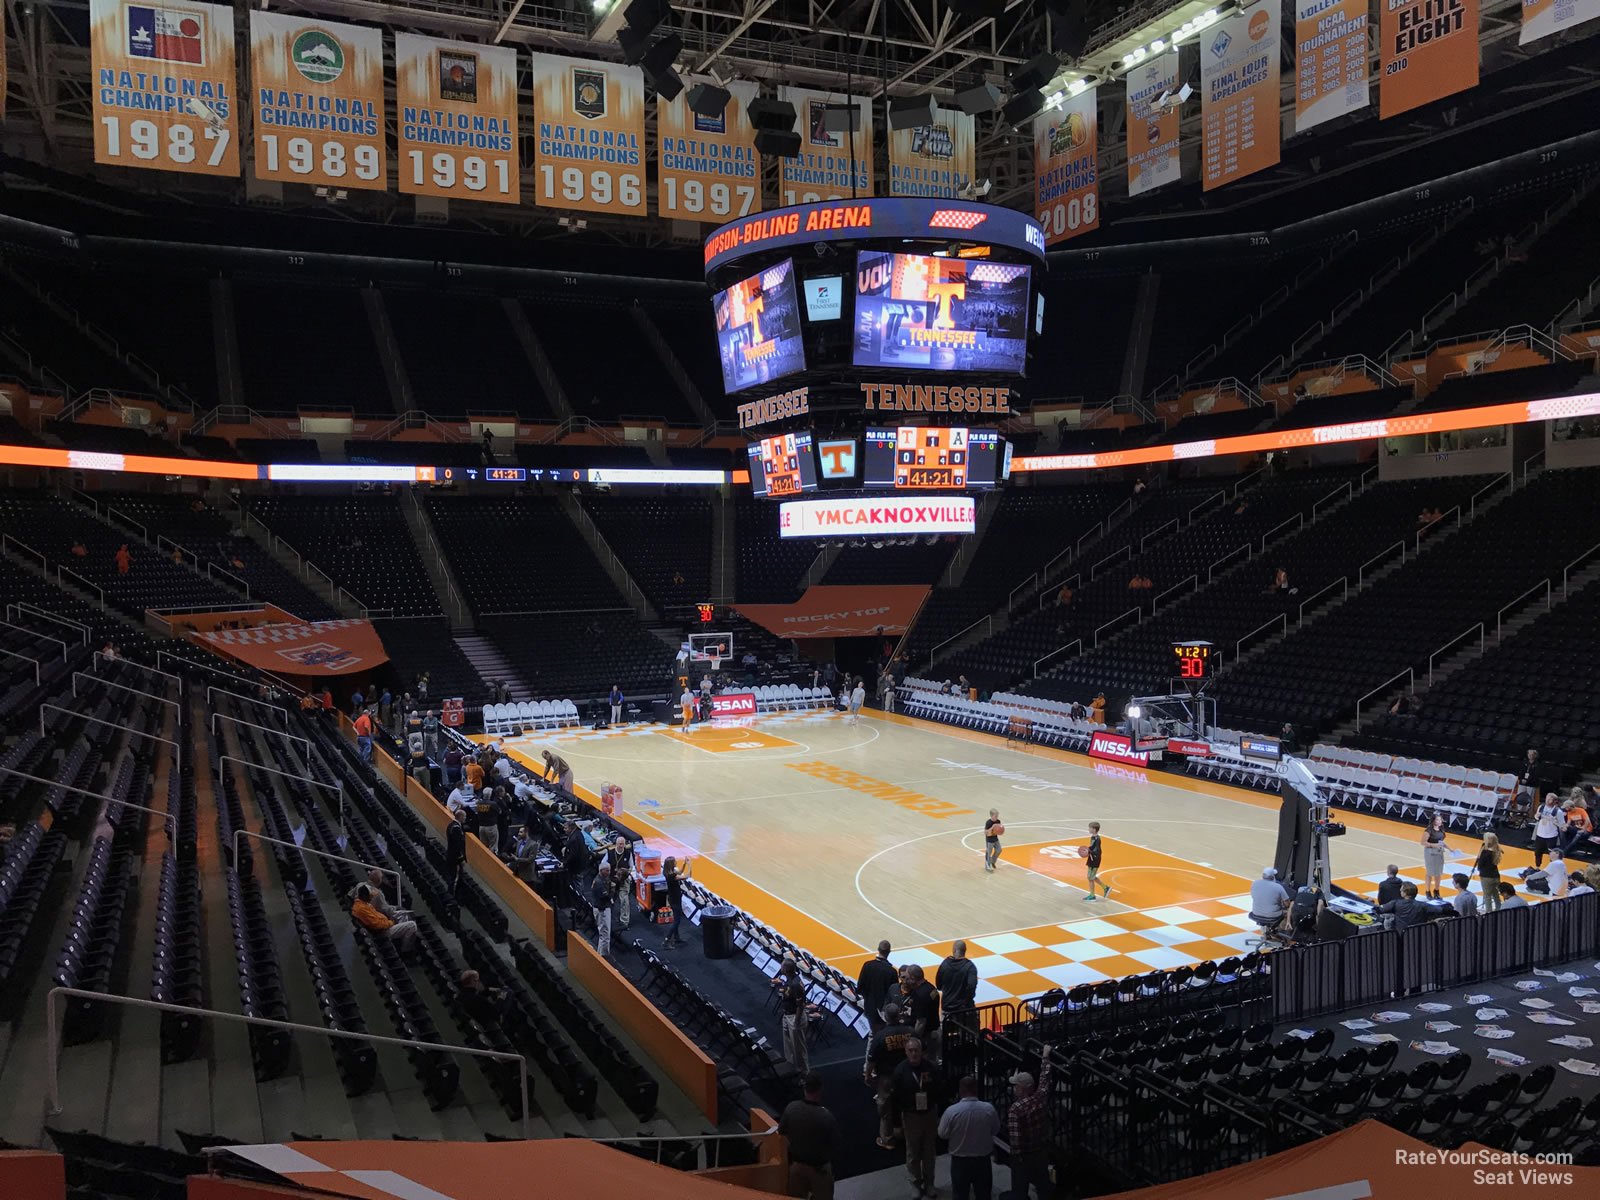 section 100, row 17 seat view  - thompson-boling arena